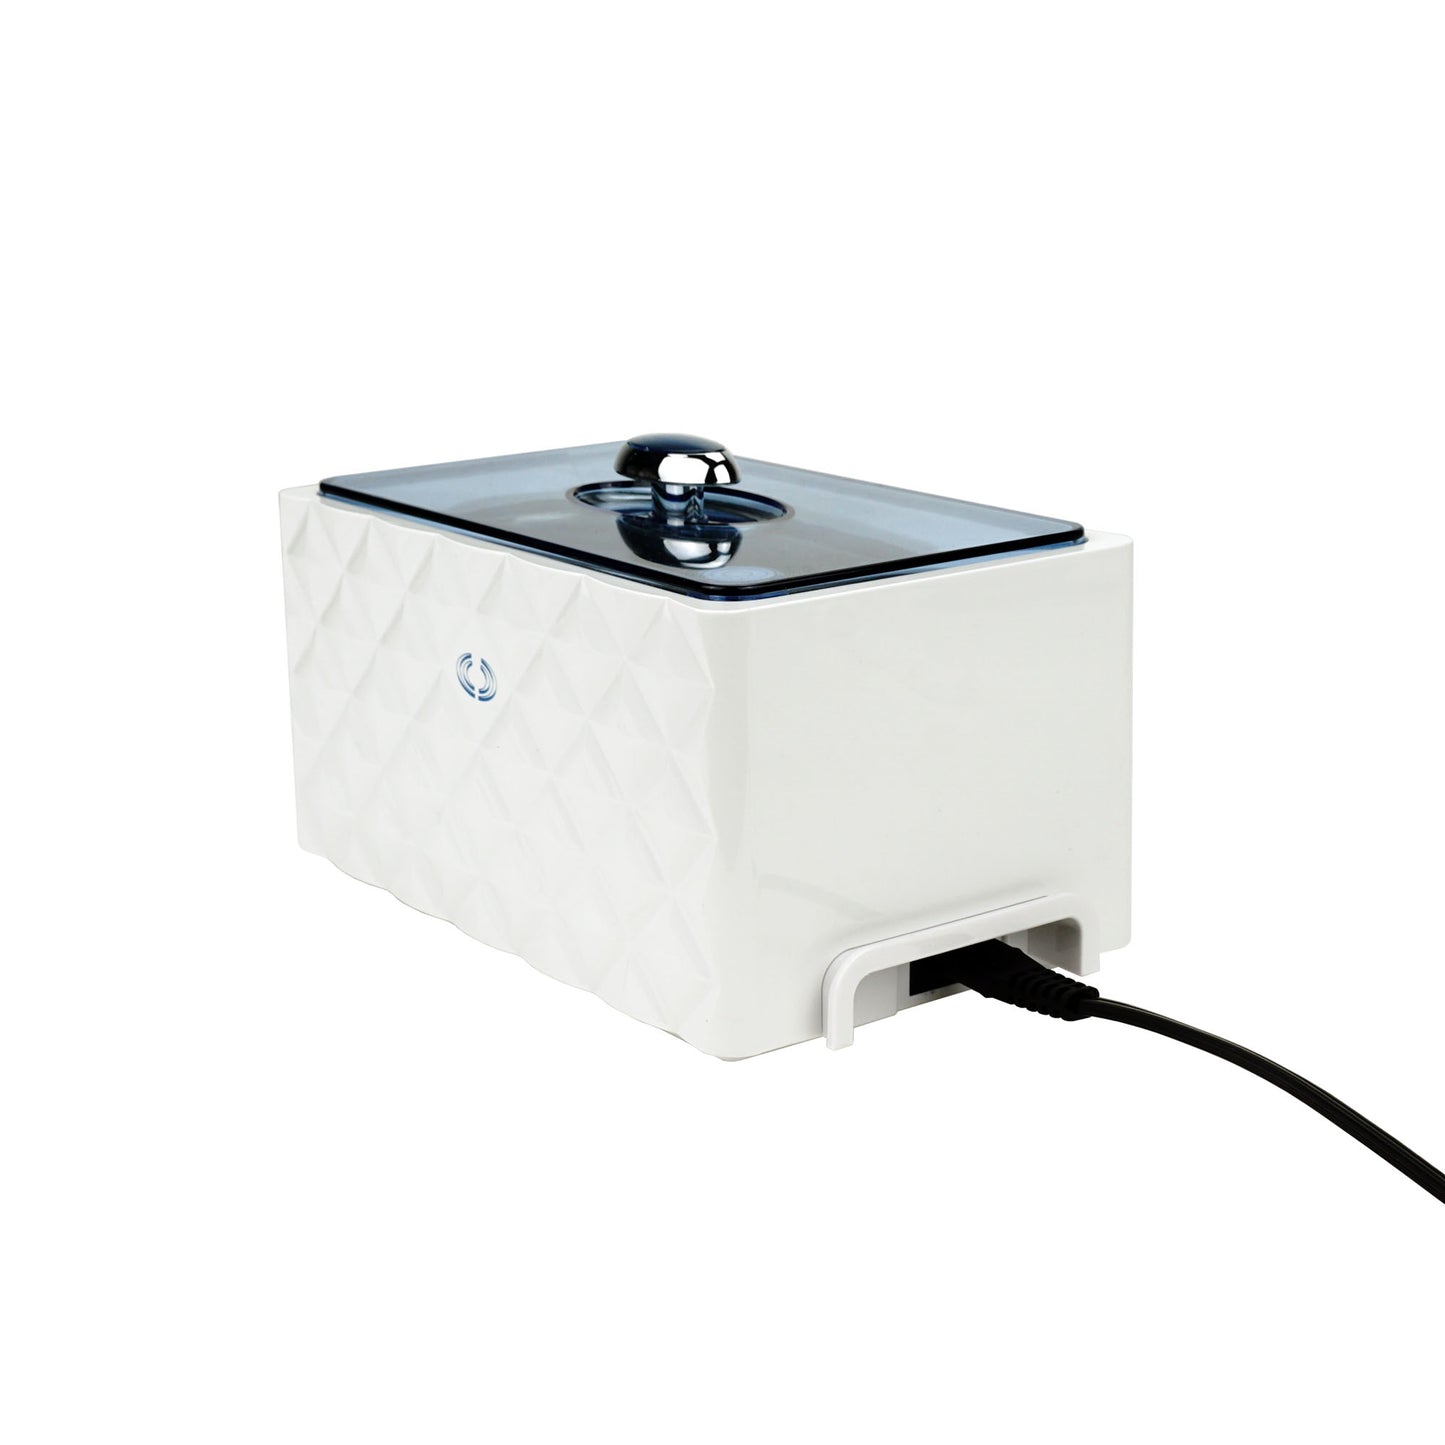 D3000+CSGJ01 | iSonic® Ultrasonic Cleaner, 0.9Pt/0.45L, with Jewelry/Eyewear Cleaning Solution Concentrate CSGJ01, 8OZ, Promotional Price!